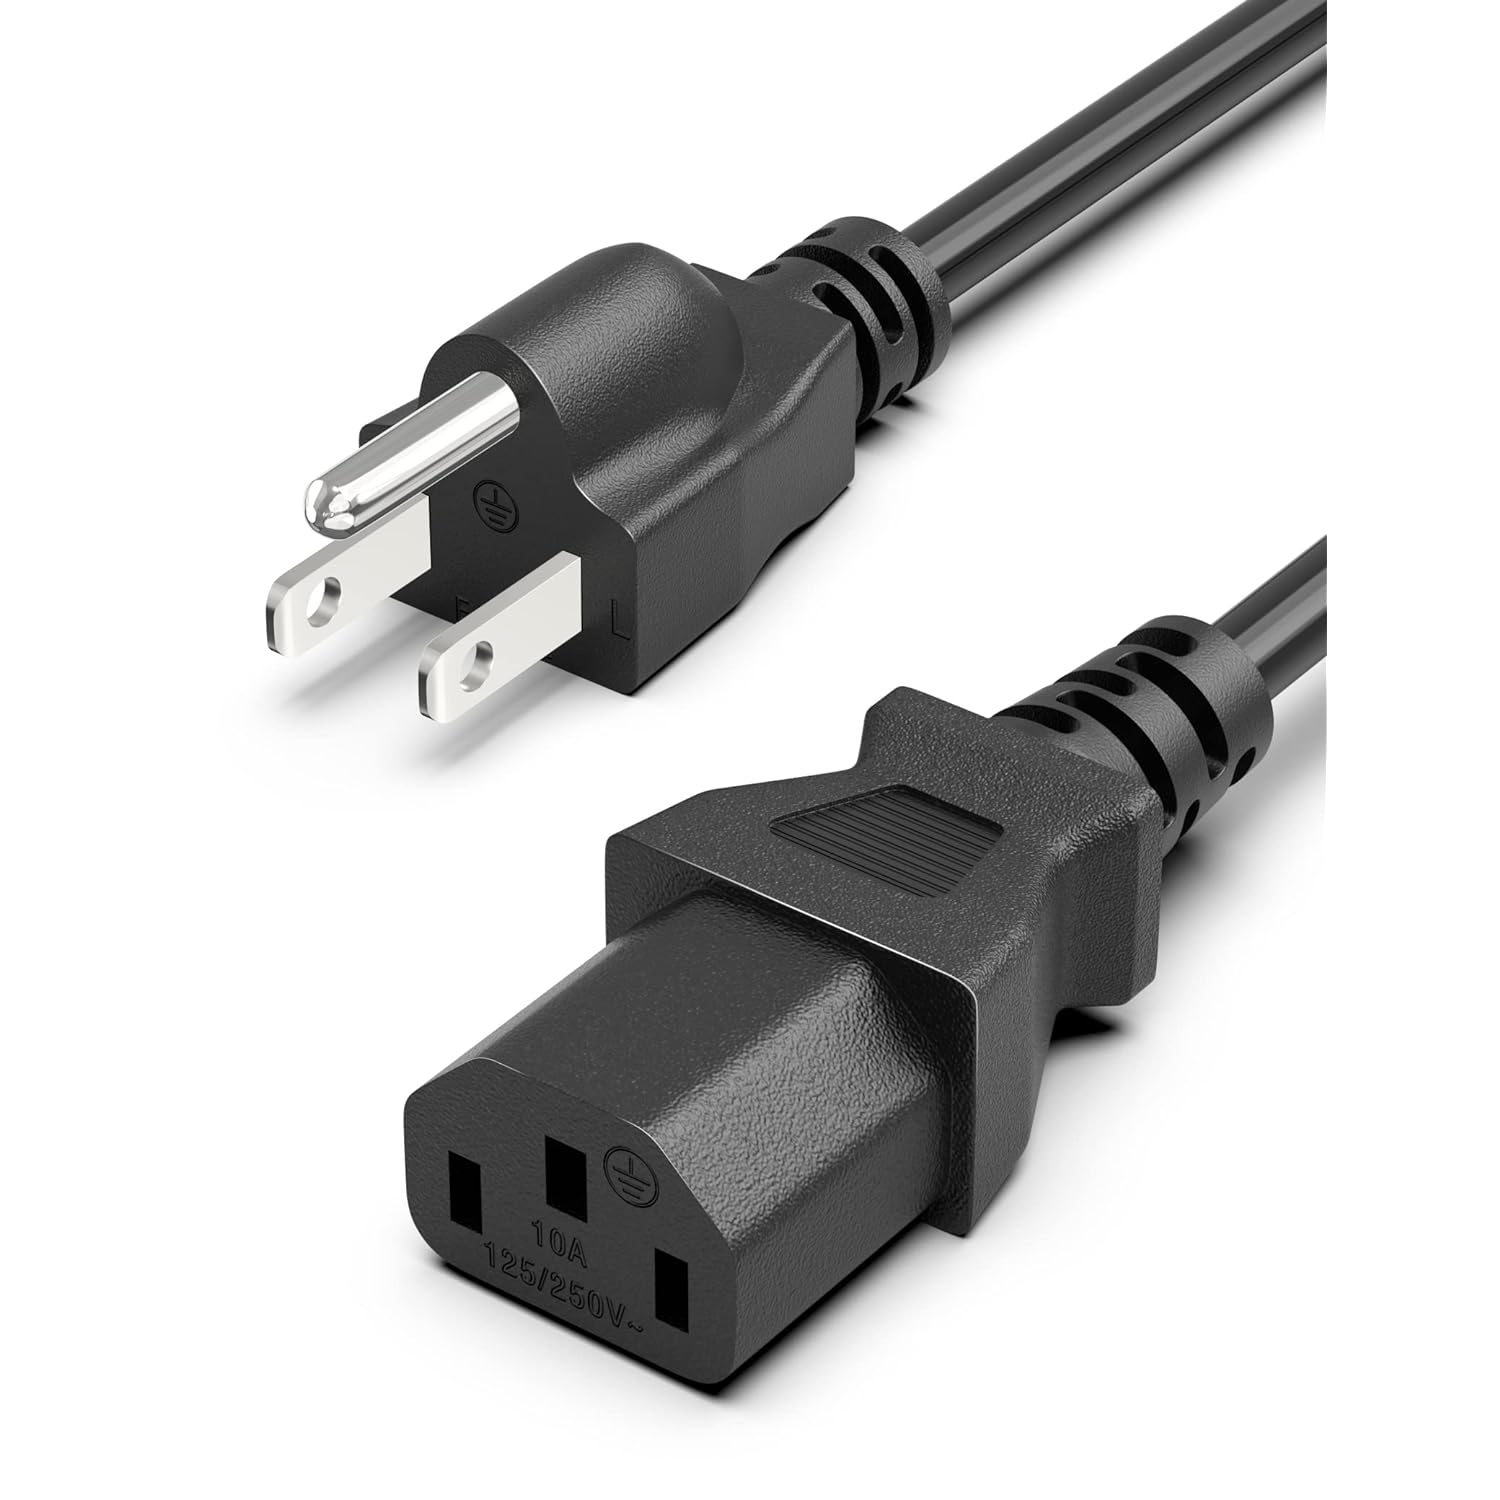 10Ft 18AWG Computer Power Cord: NEMA 5-15P to C13 AC Power Cord for TV, Computer, PC Monitor - Samsung, Dell, Vizio, LG, Asus